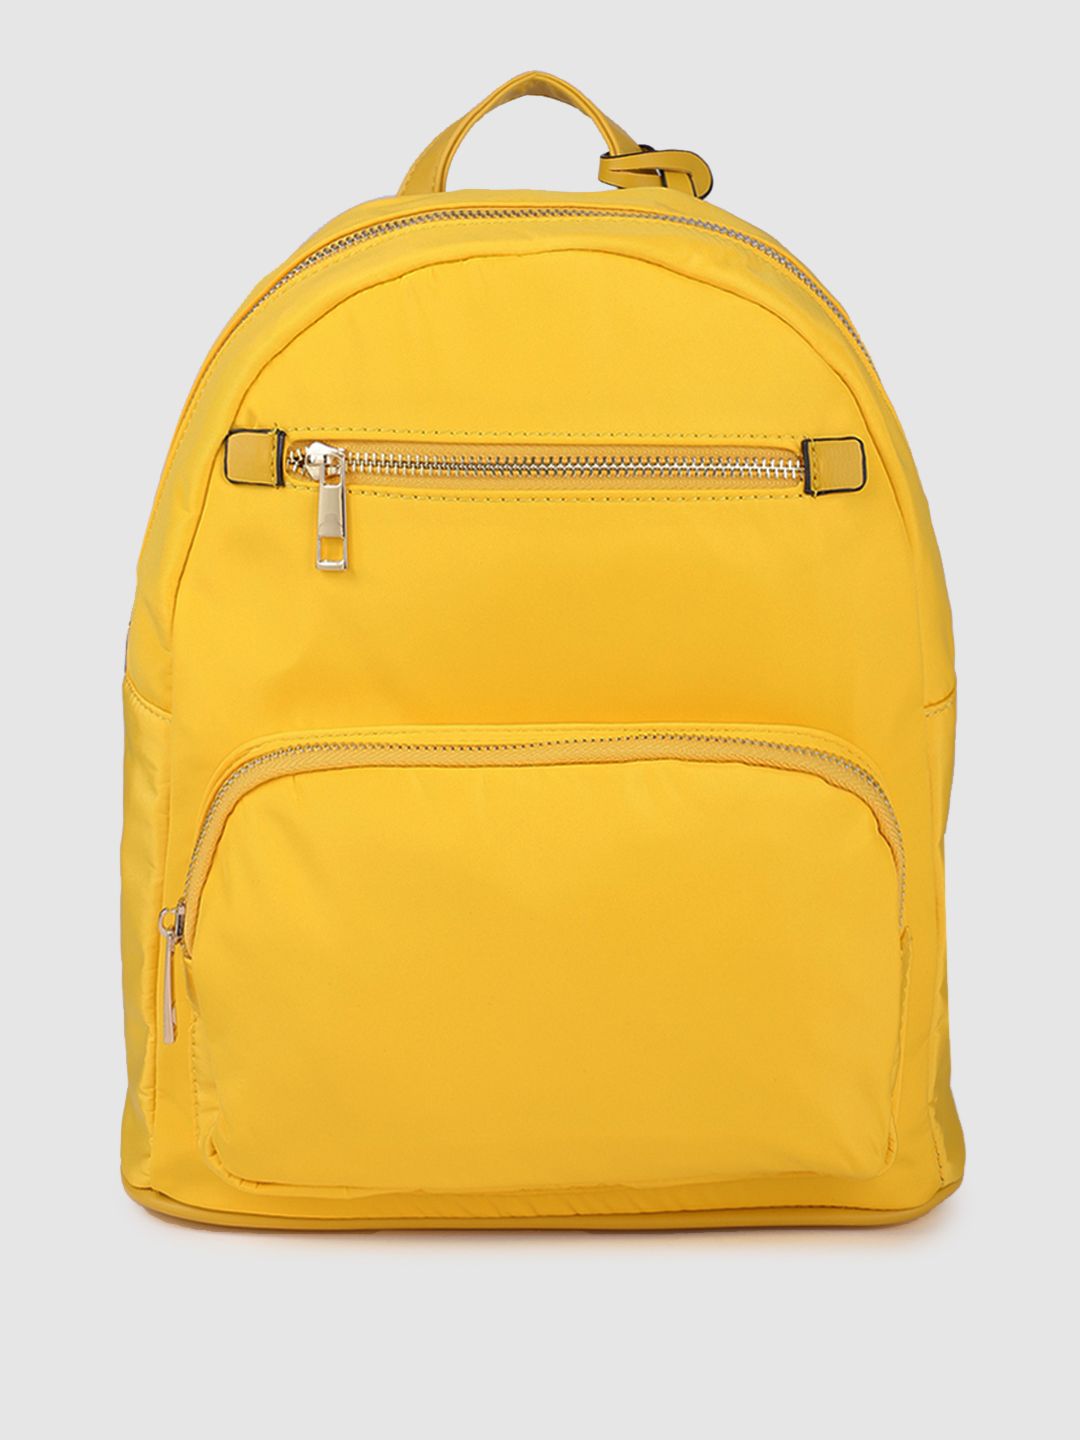 Allen Solly Women Yellow Solid Backpack Price in India